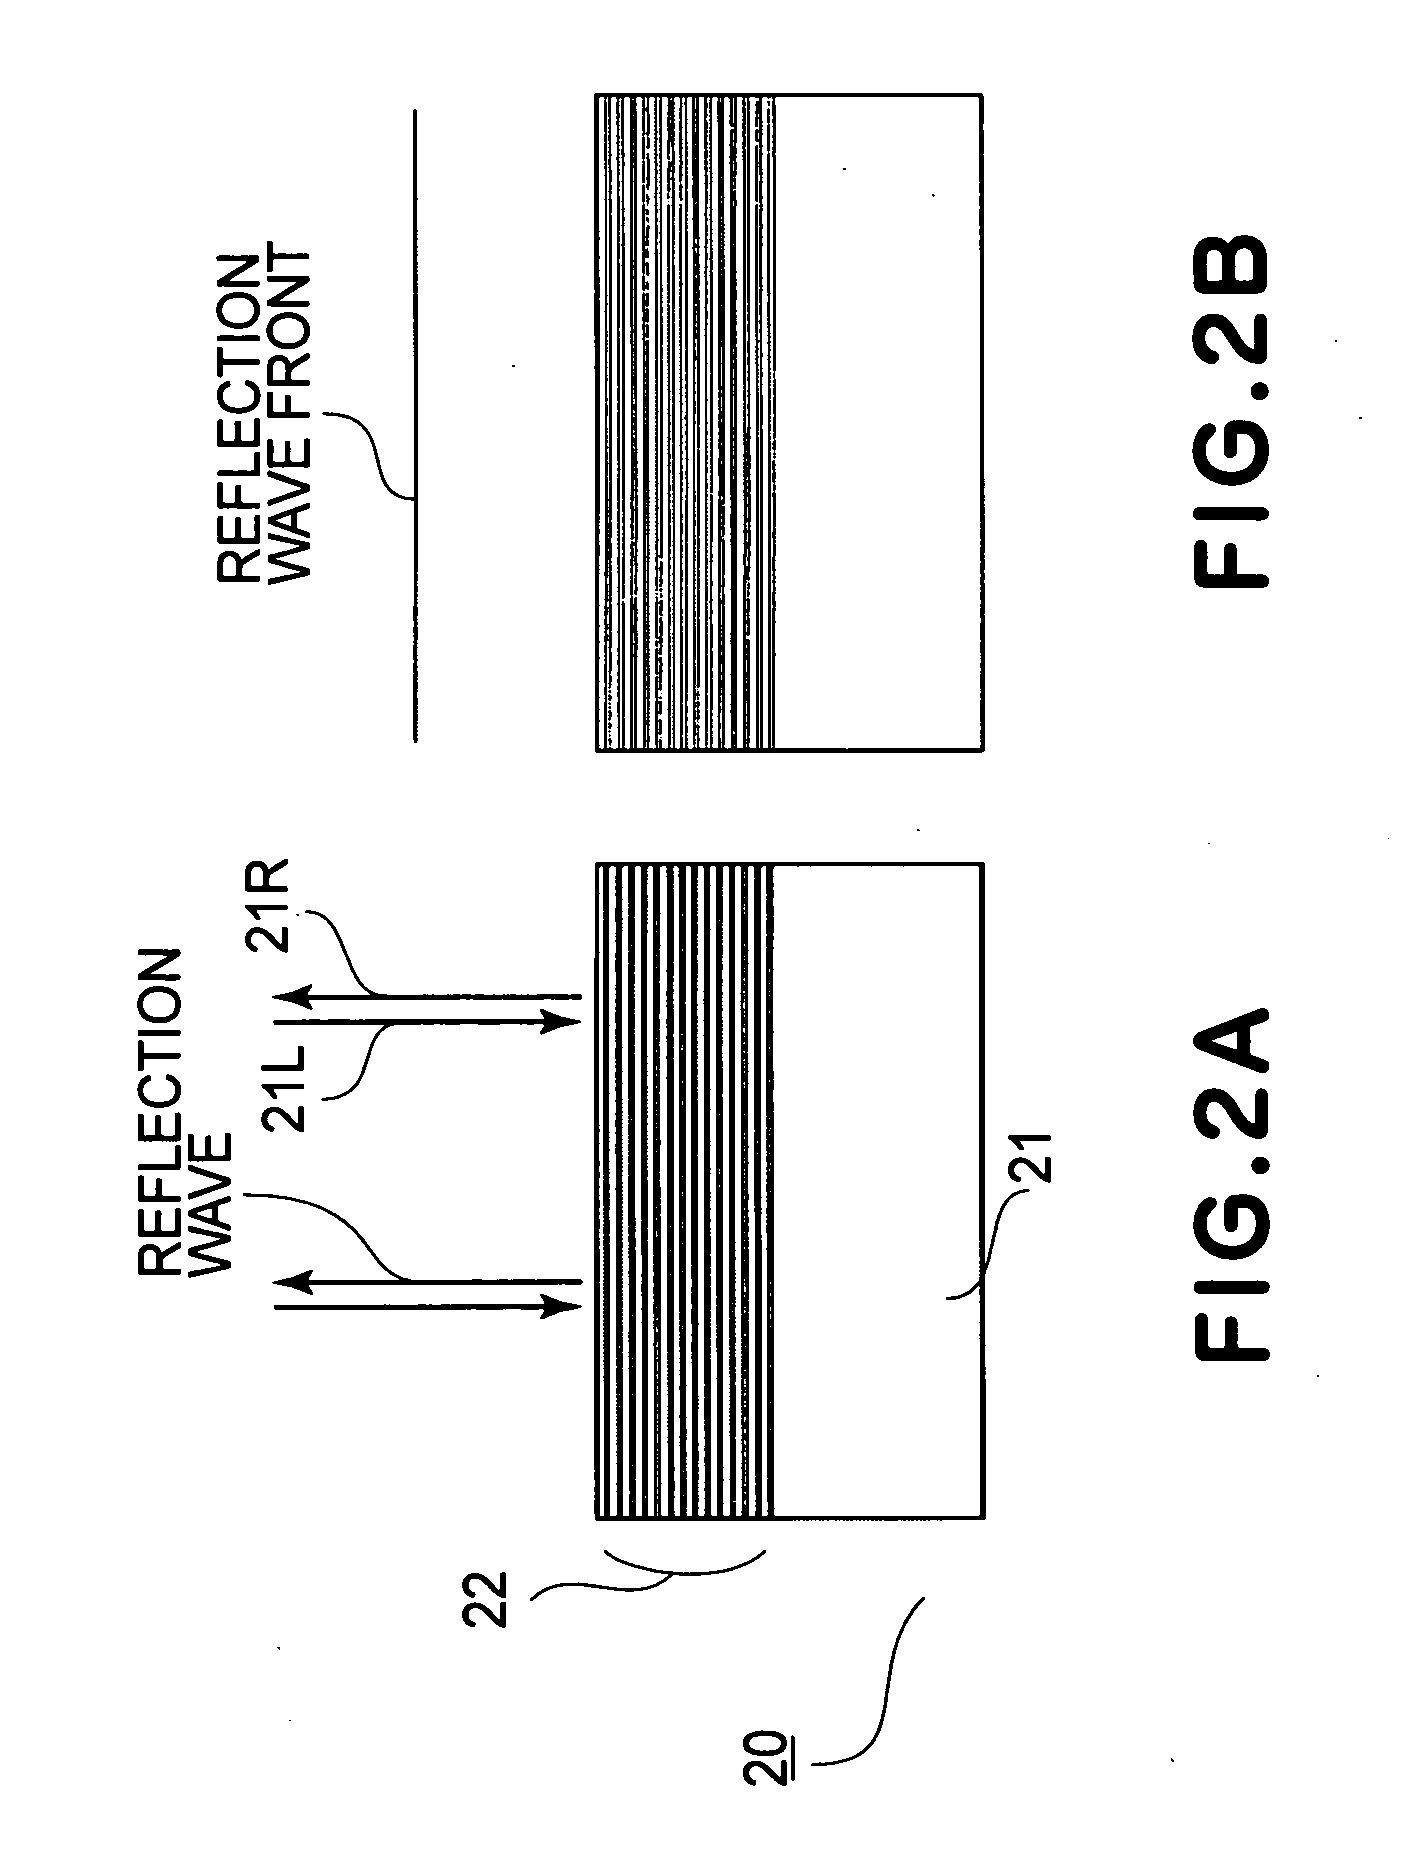 Mirror unit, method of producing the same, and exposure apparatus and method using the mirror unit